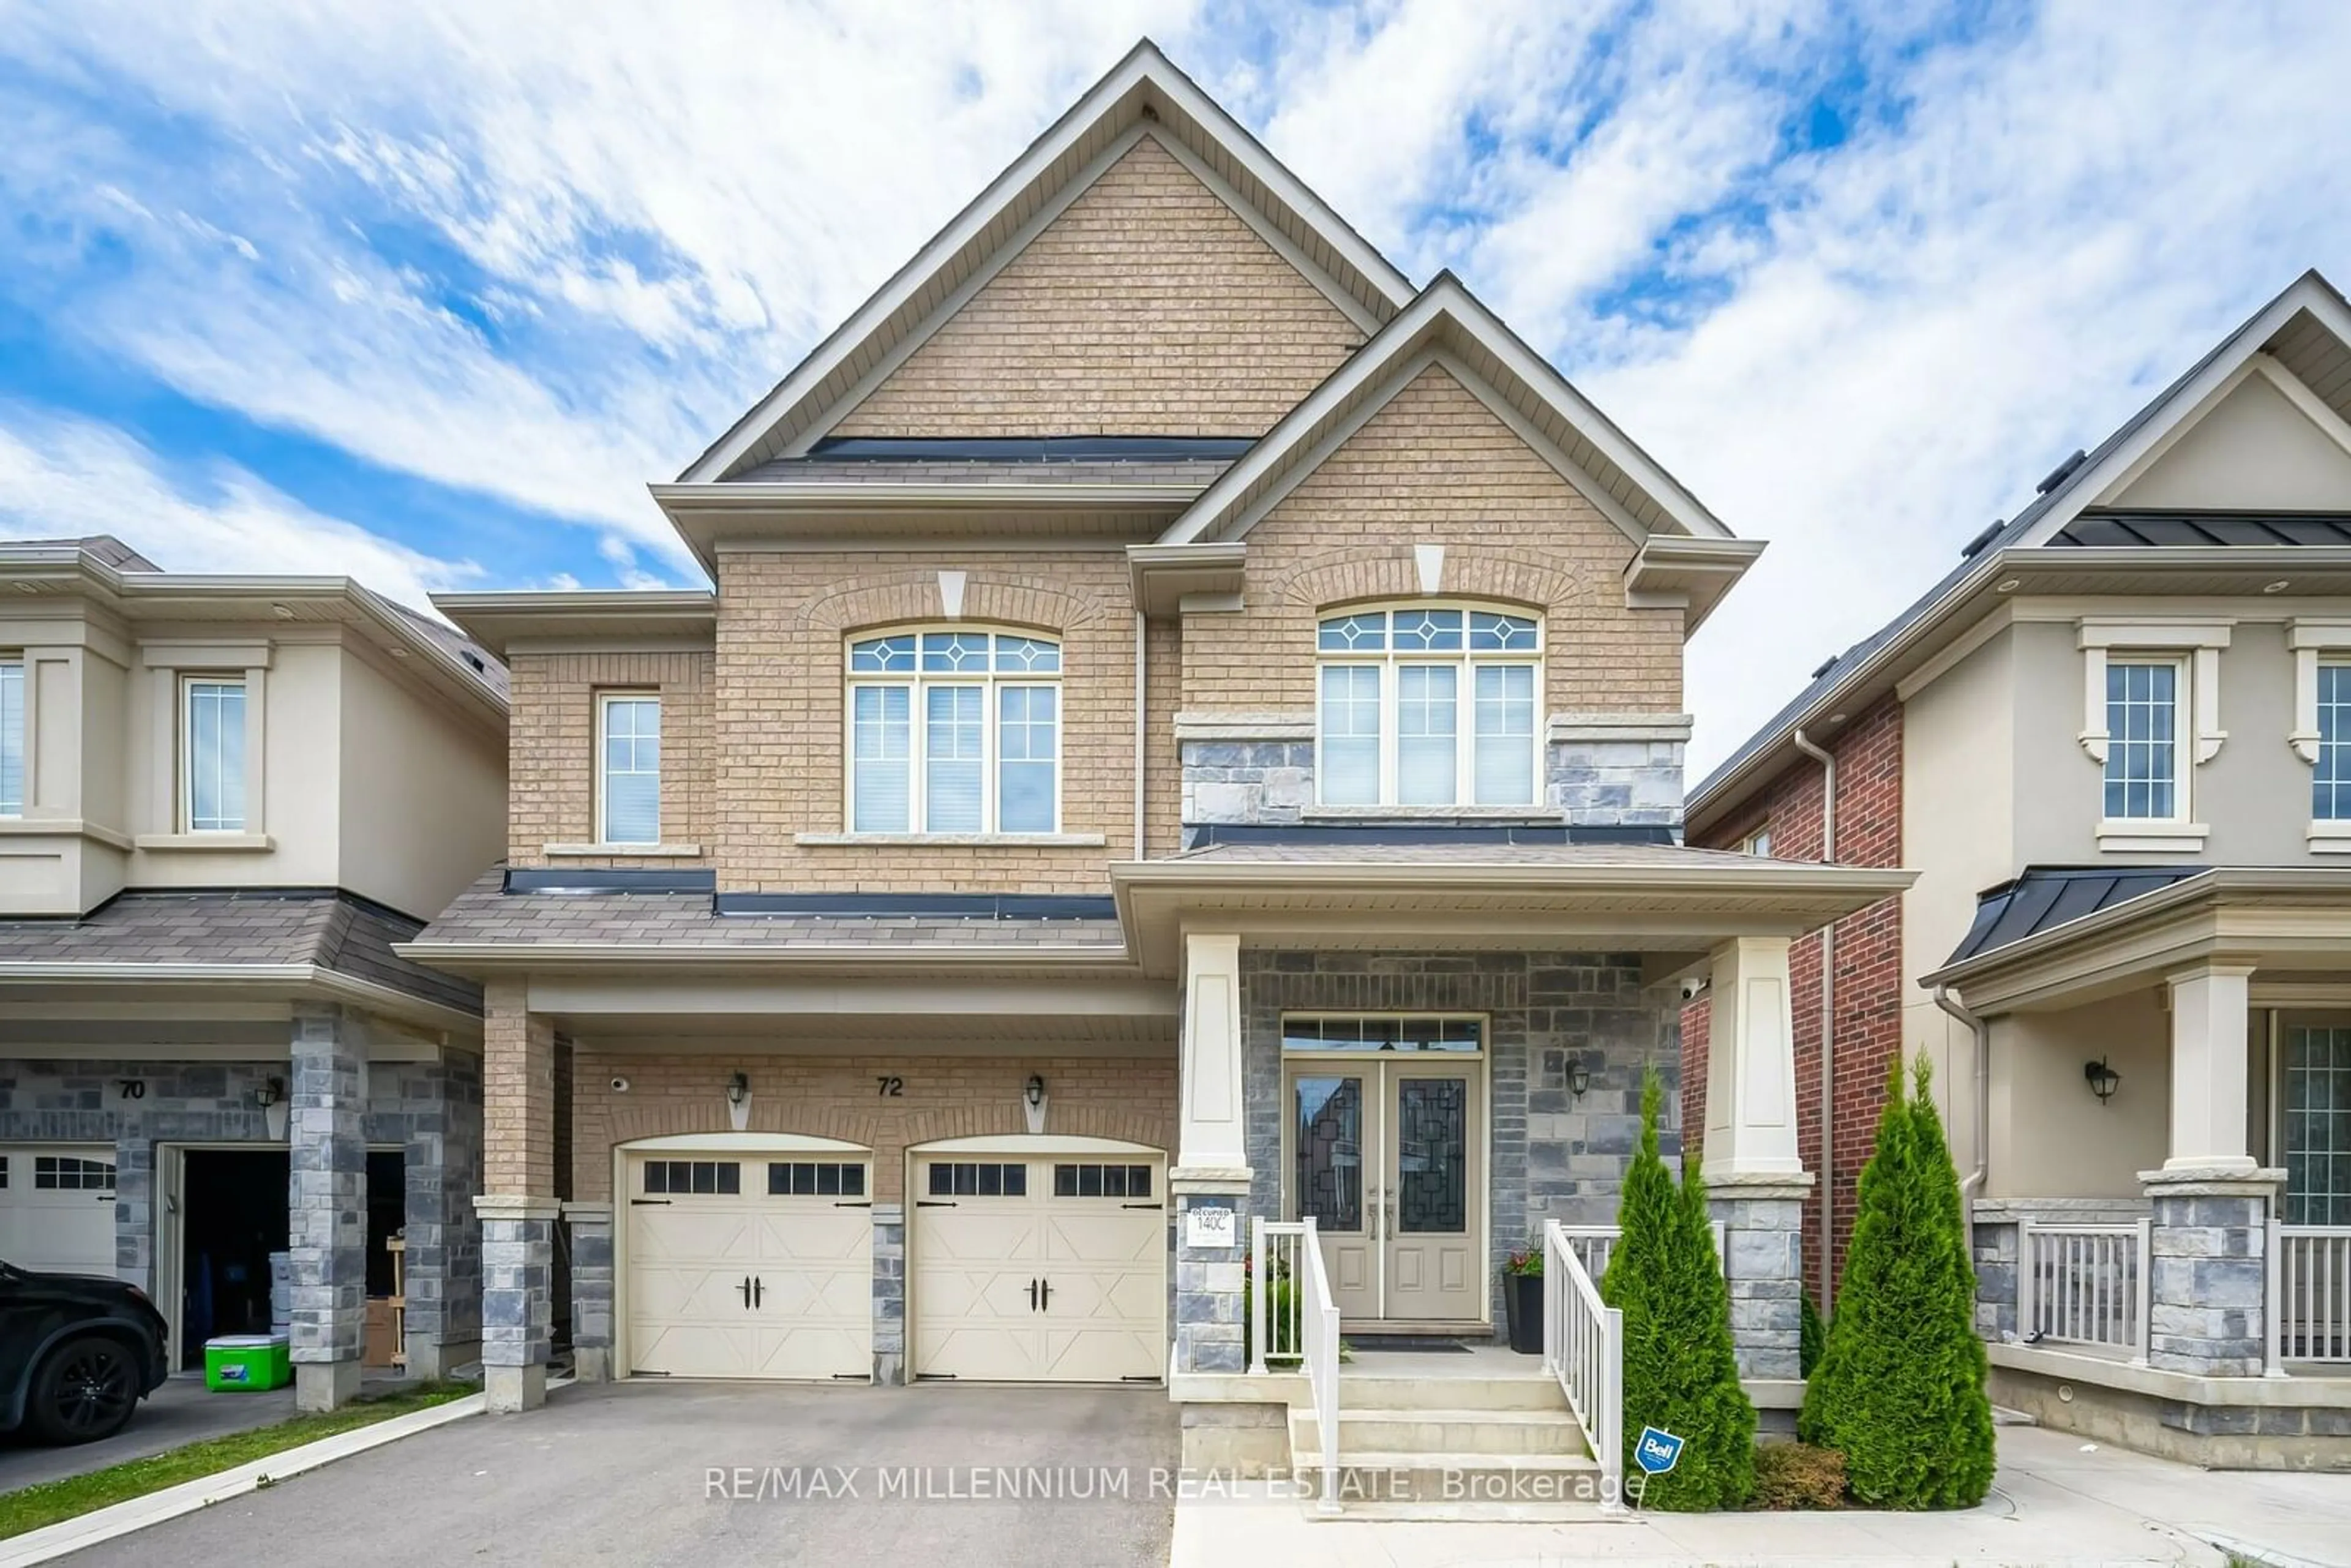 Home with brick exterior material for 72 Russell Creek Dr, Brampton Ontario L6R 3Z3